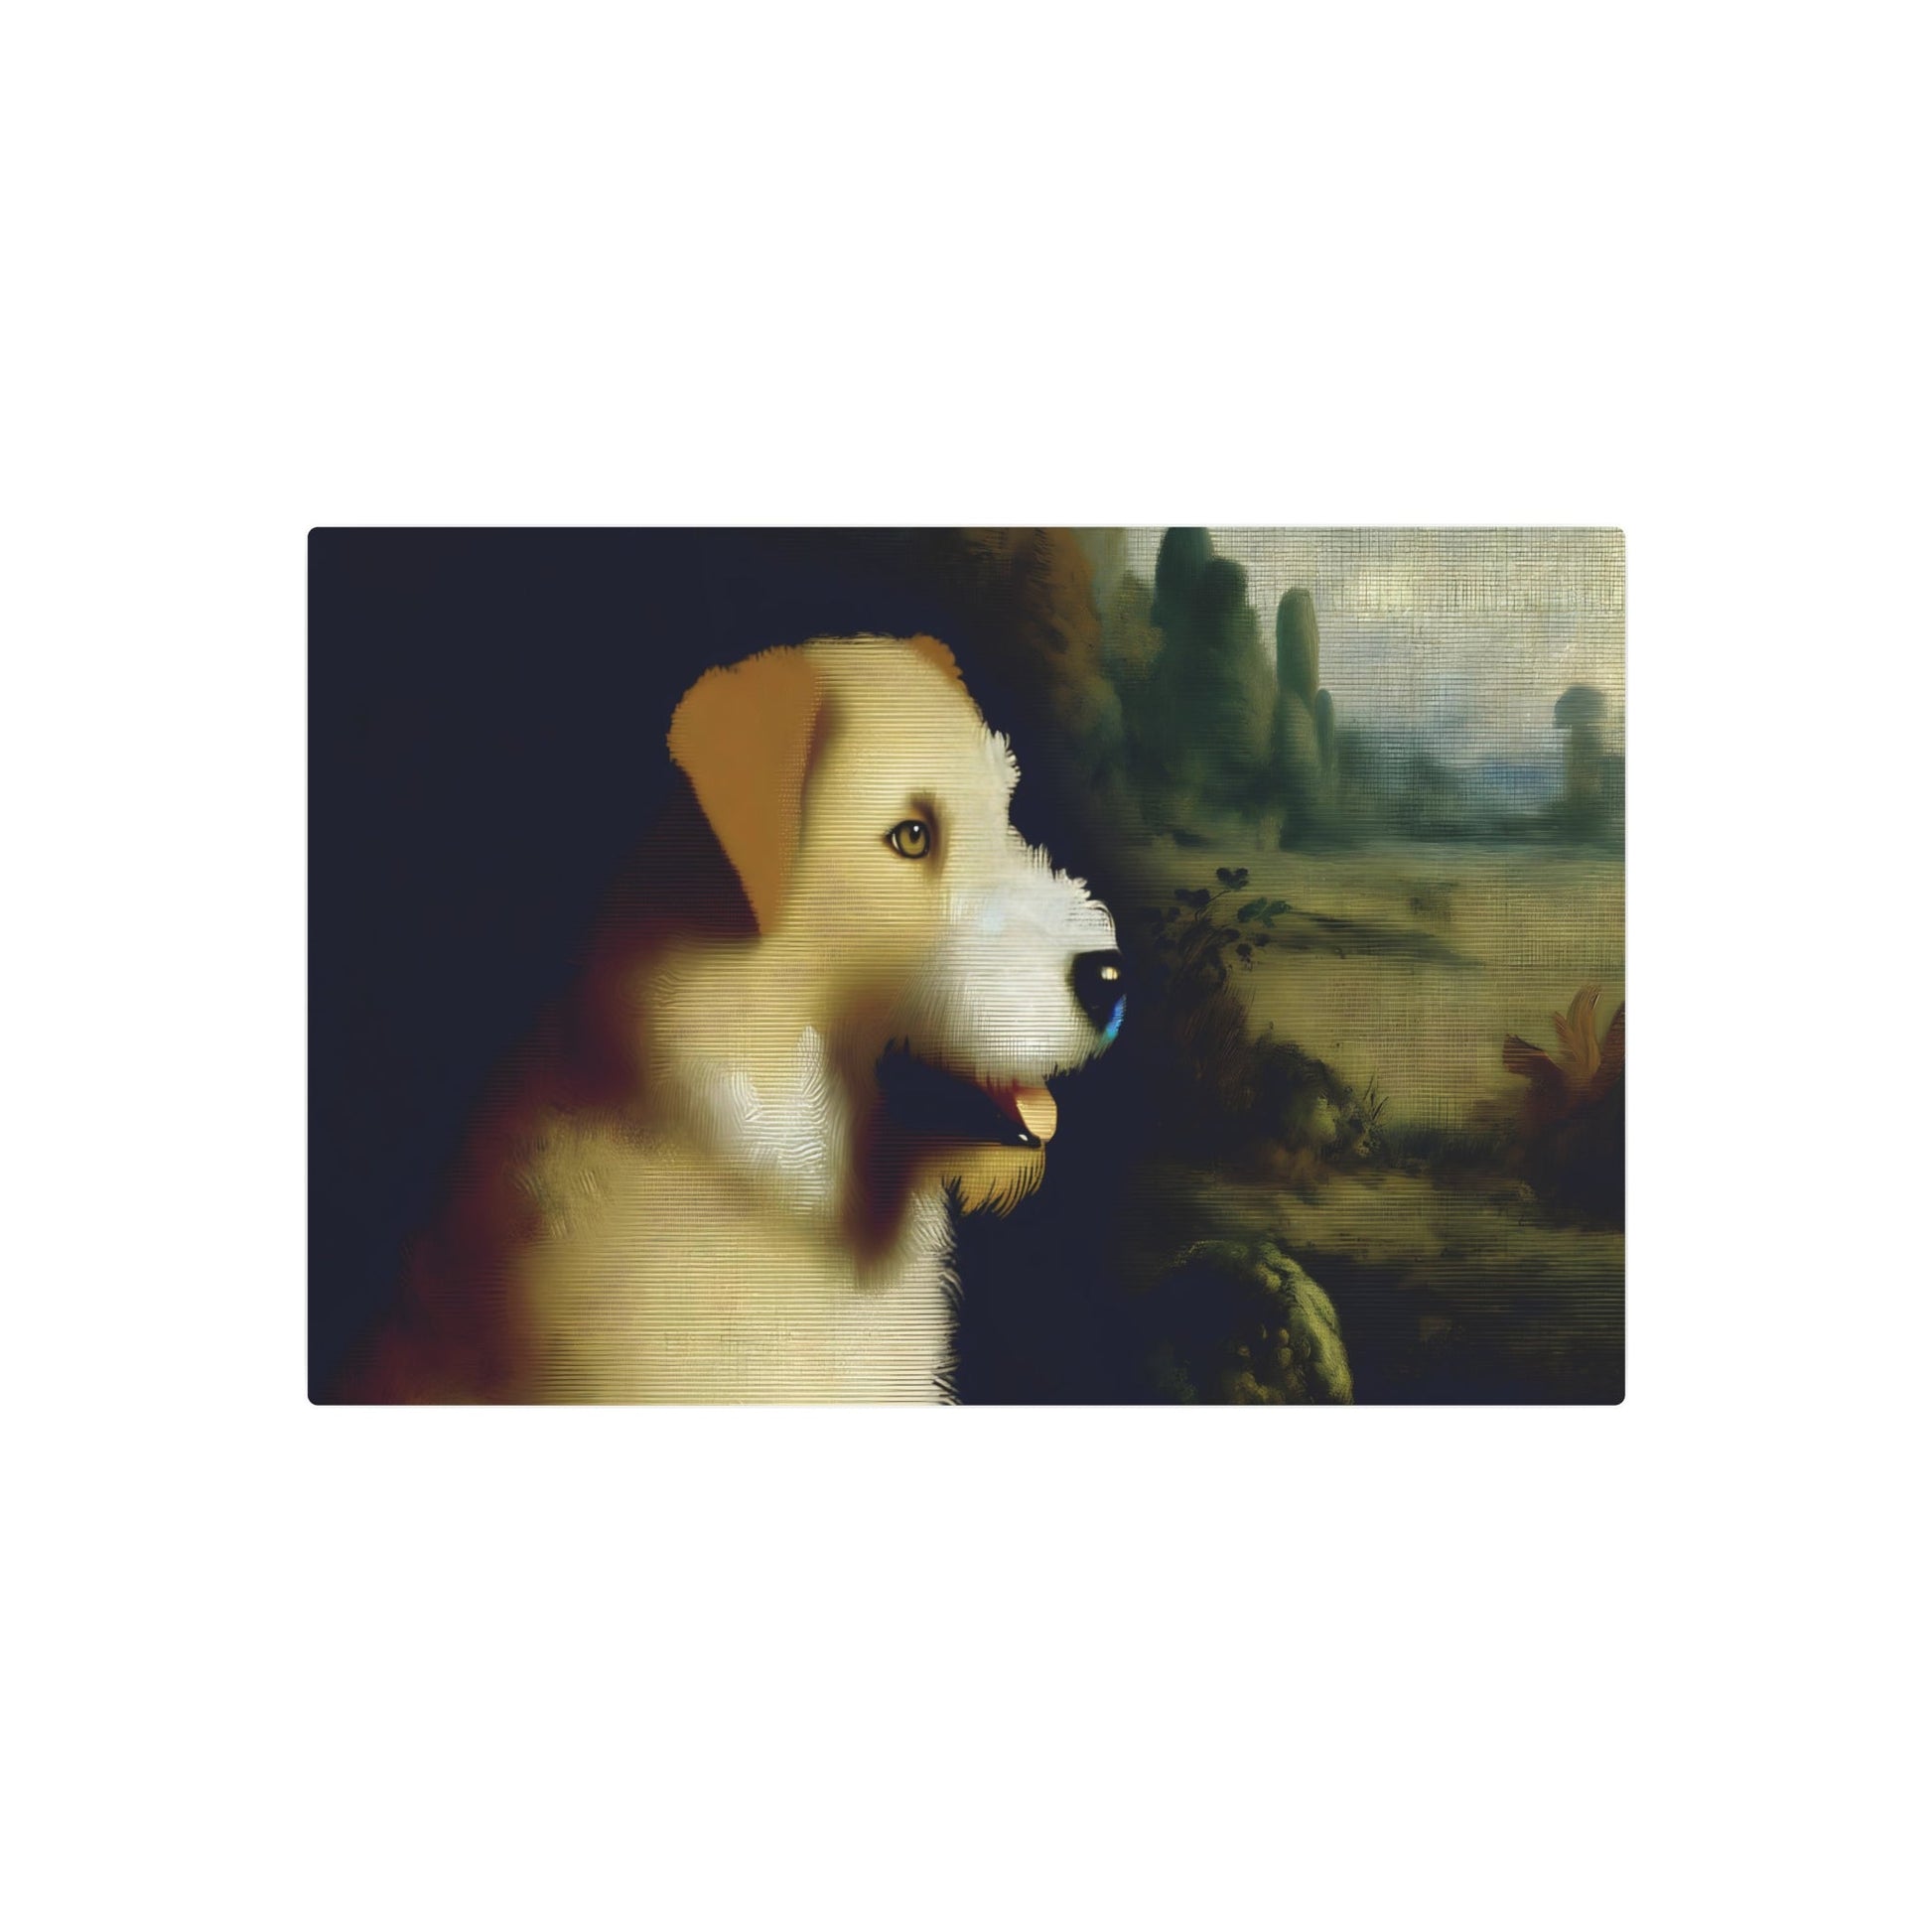 Metal Poster Art | "Neoclassical Art Dog Painting in Detailed Jacques-Louis David Style - Western Neoclassicism Masterpiece" - Metal Poster Art 30″ x 20″ (Horizontal) 0.12''